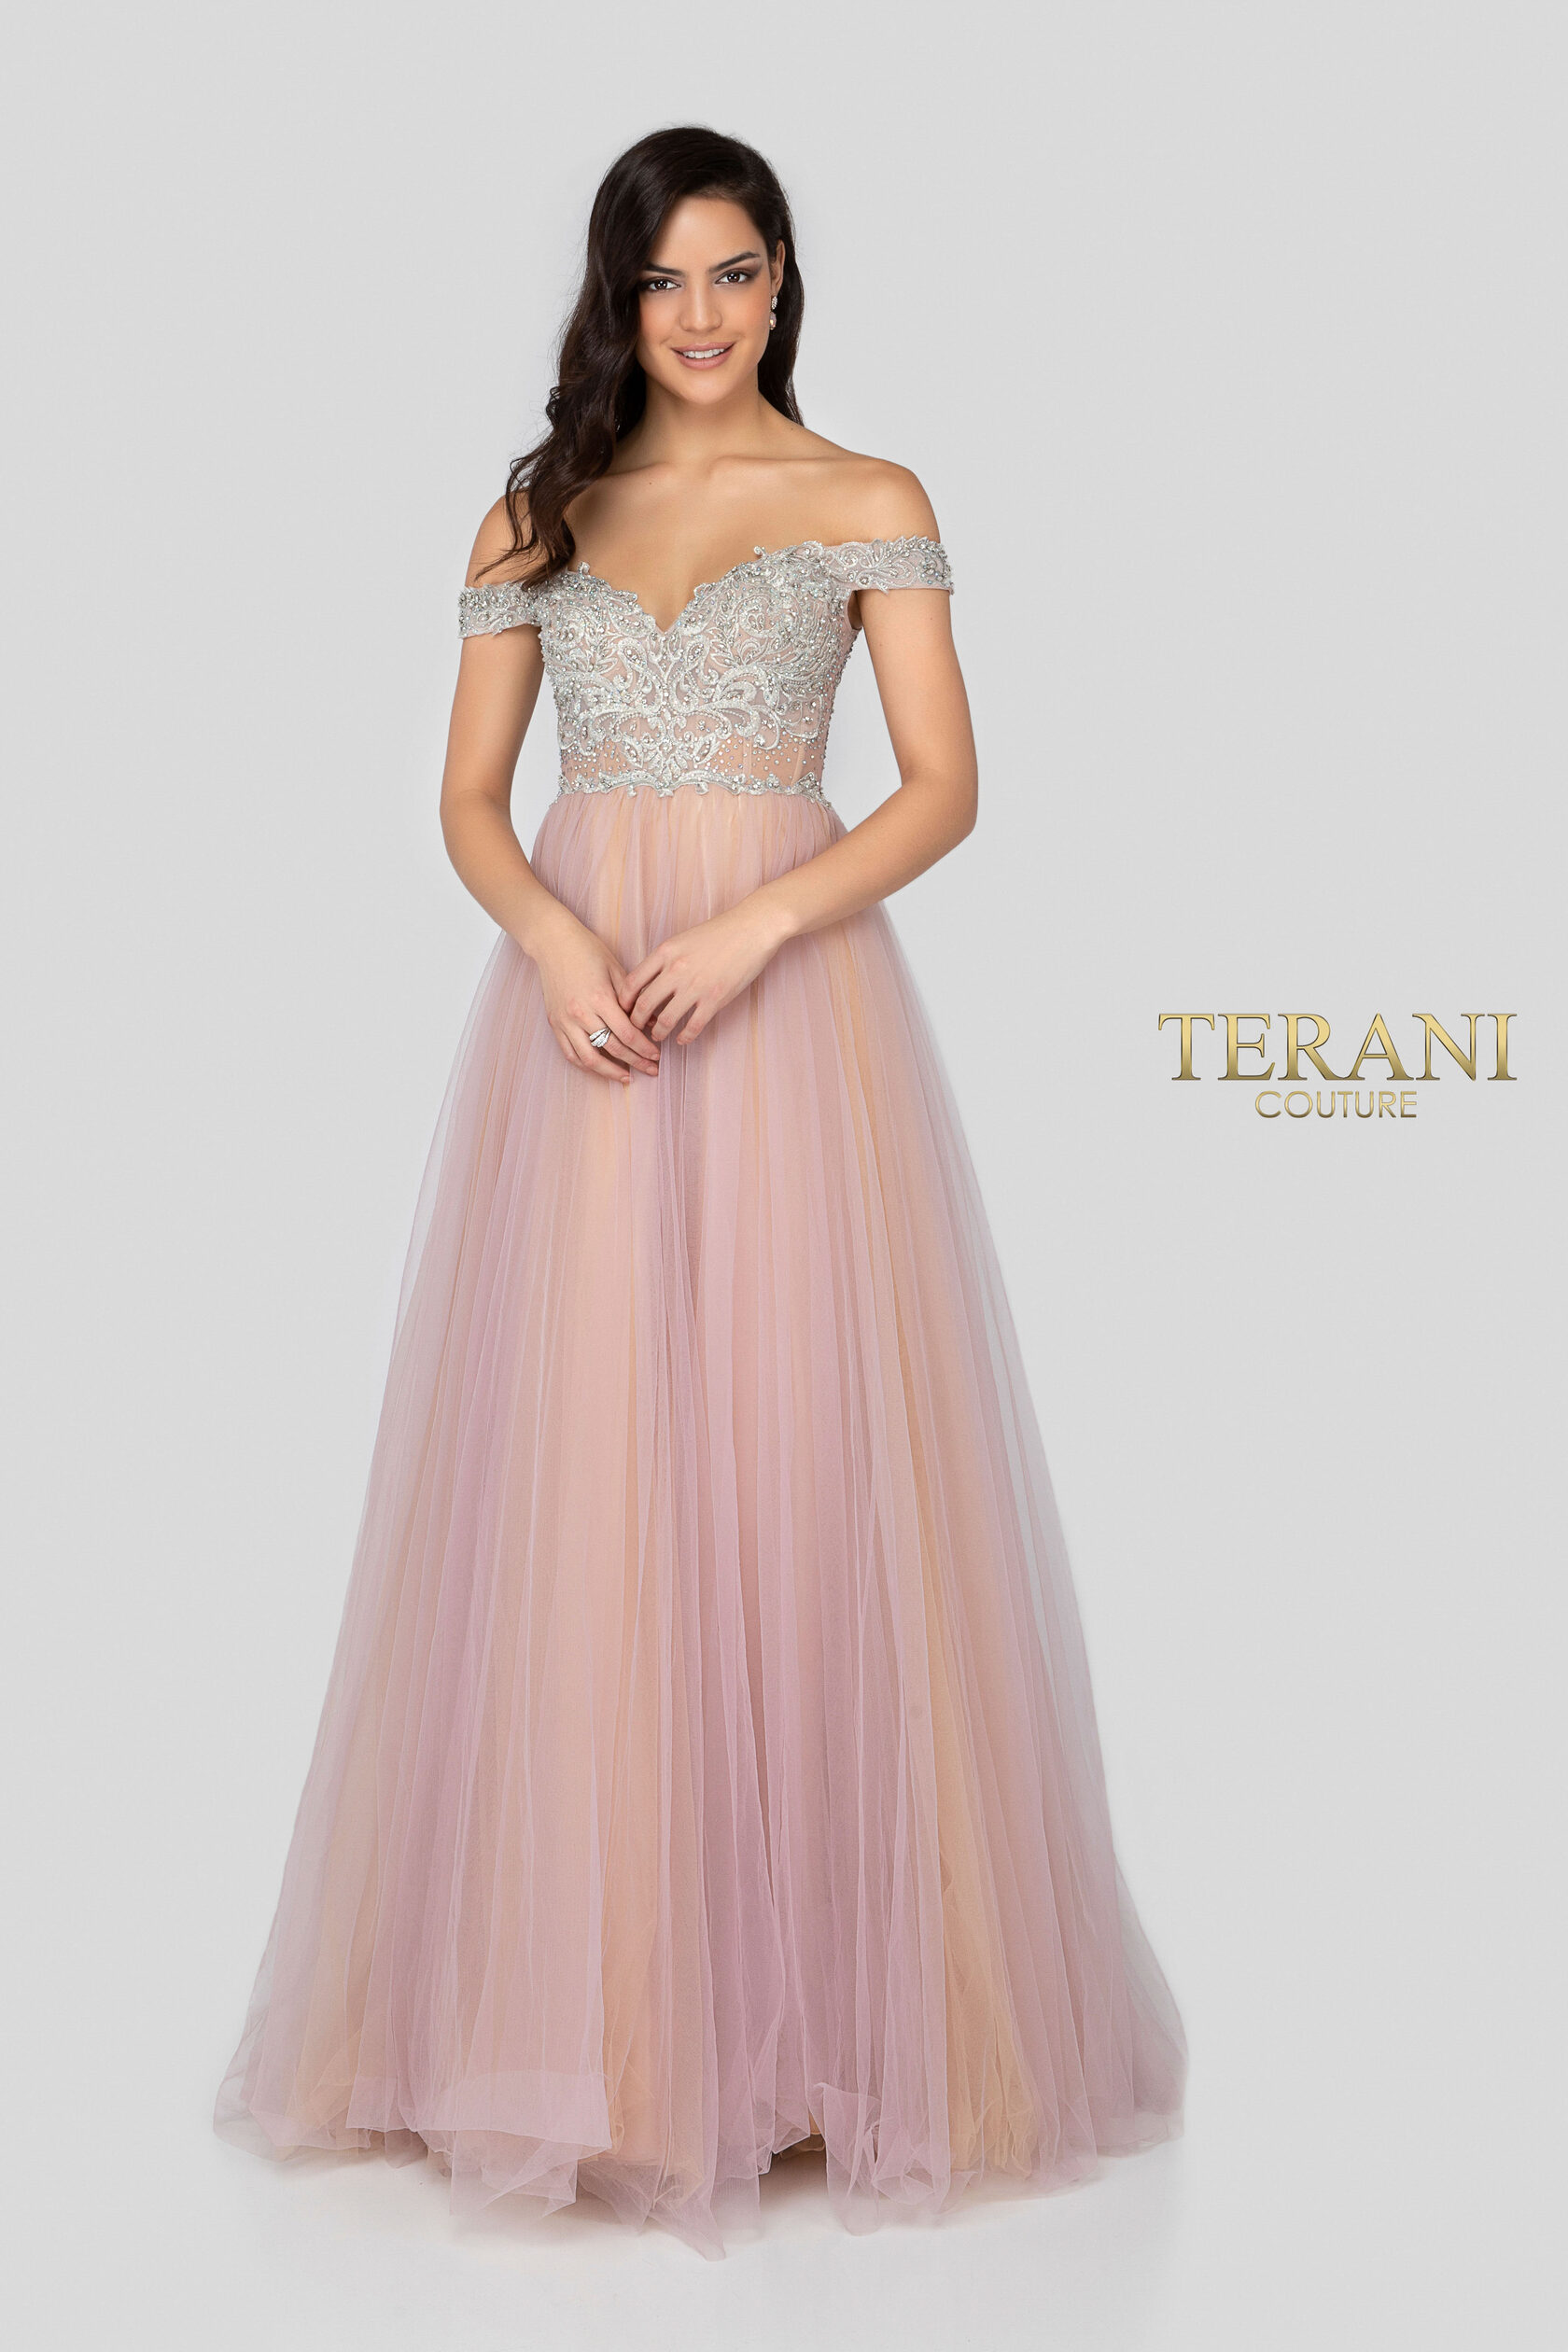 Stretch Crepe Archives - Terani Couture